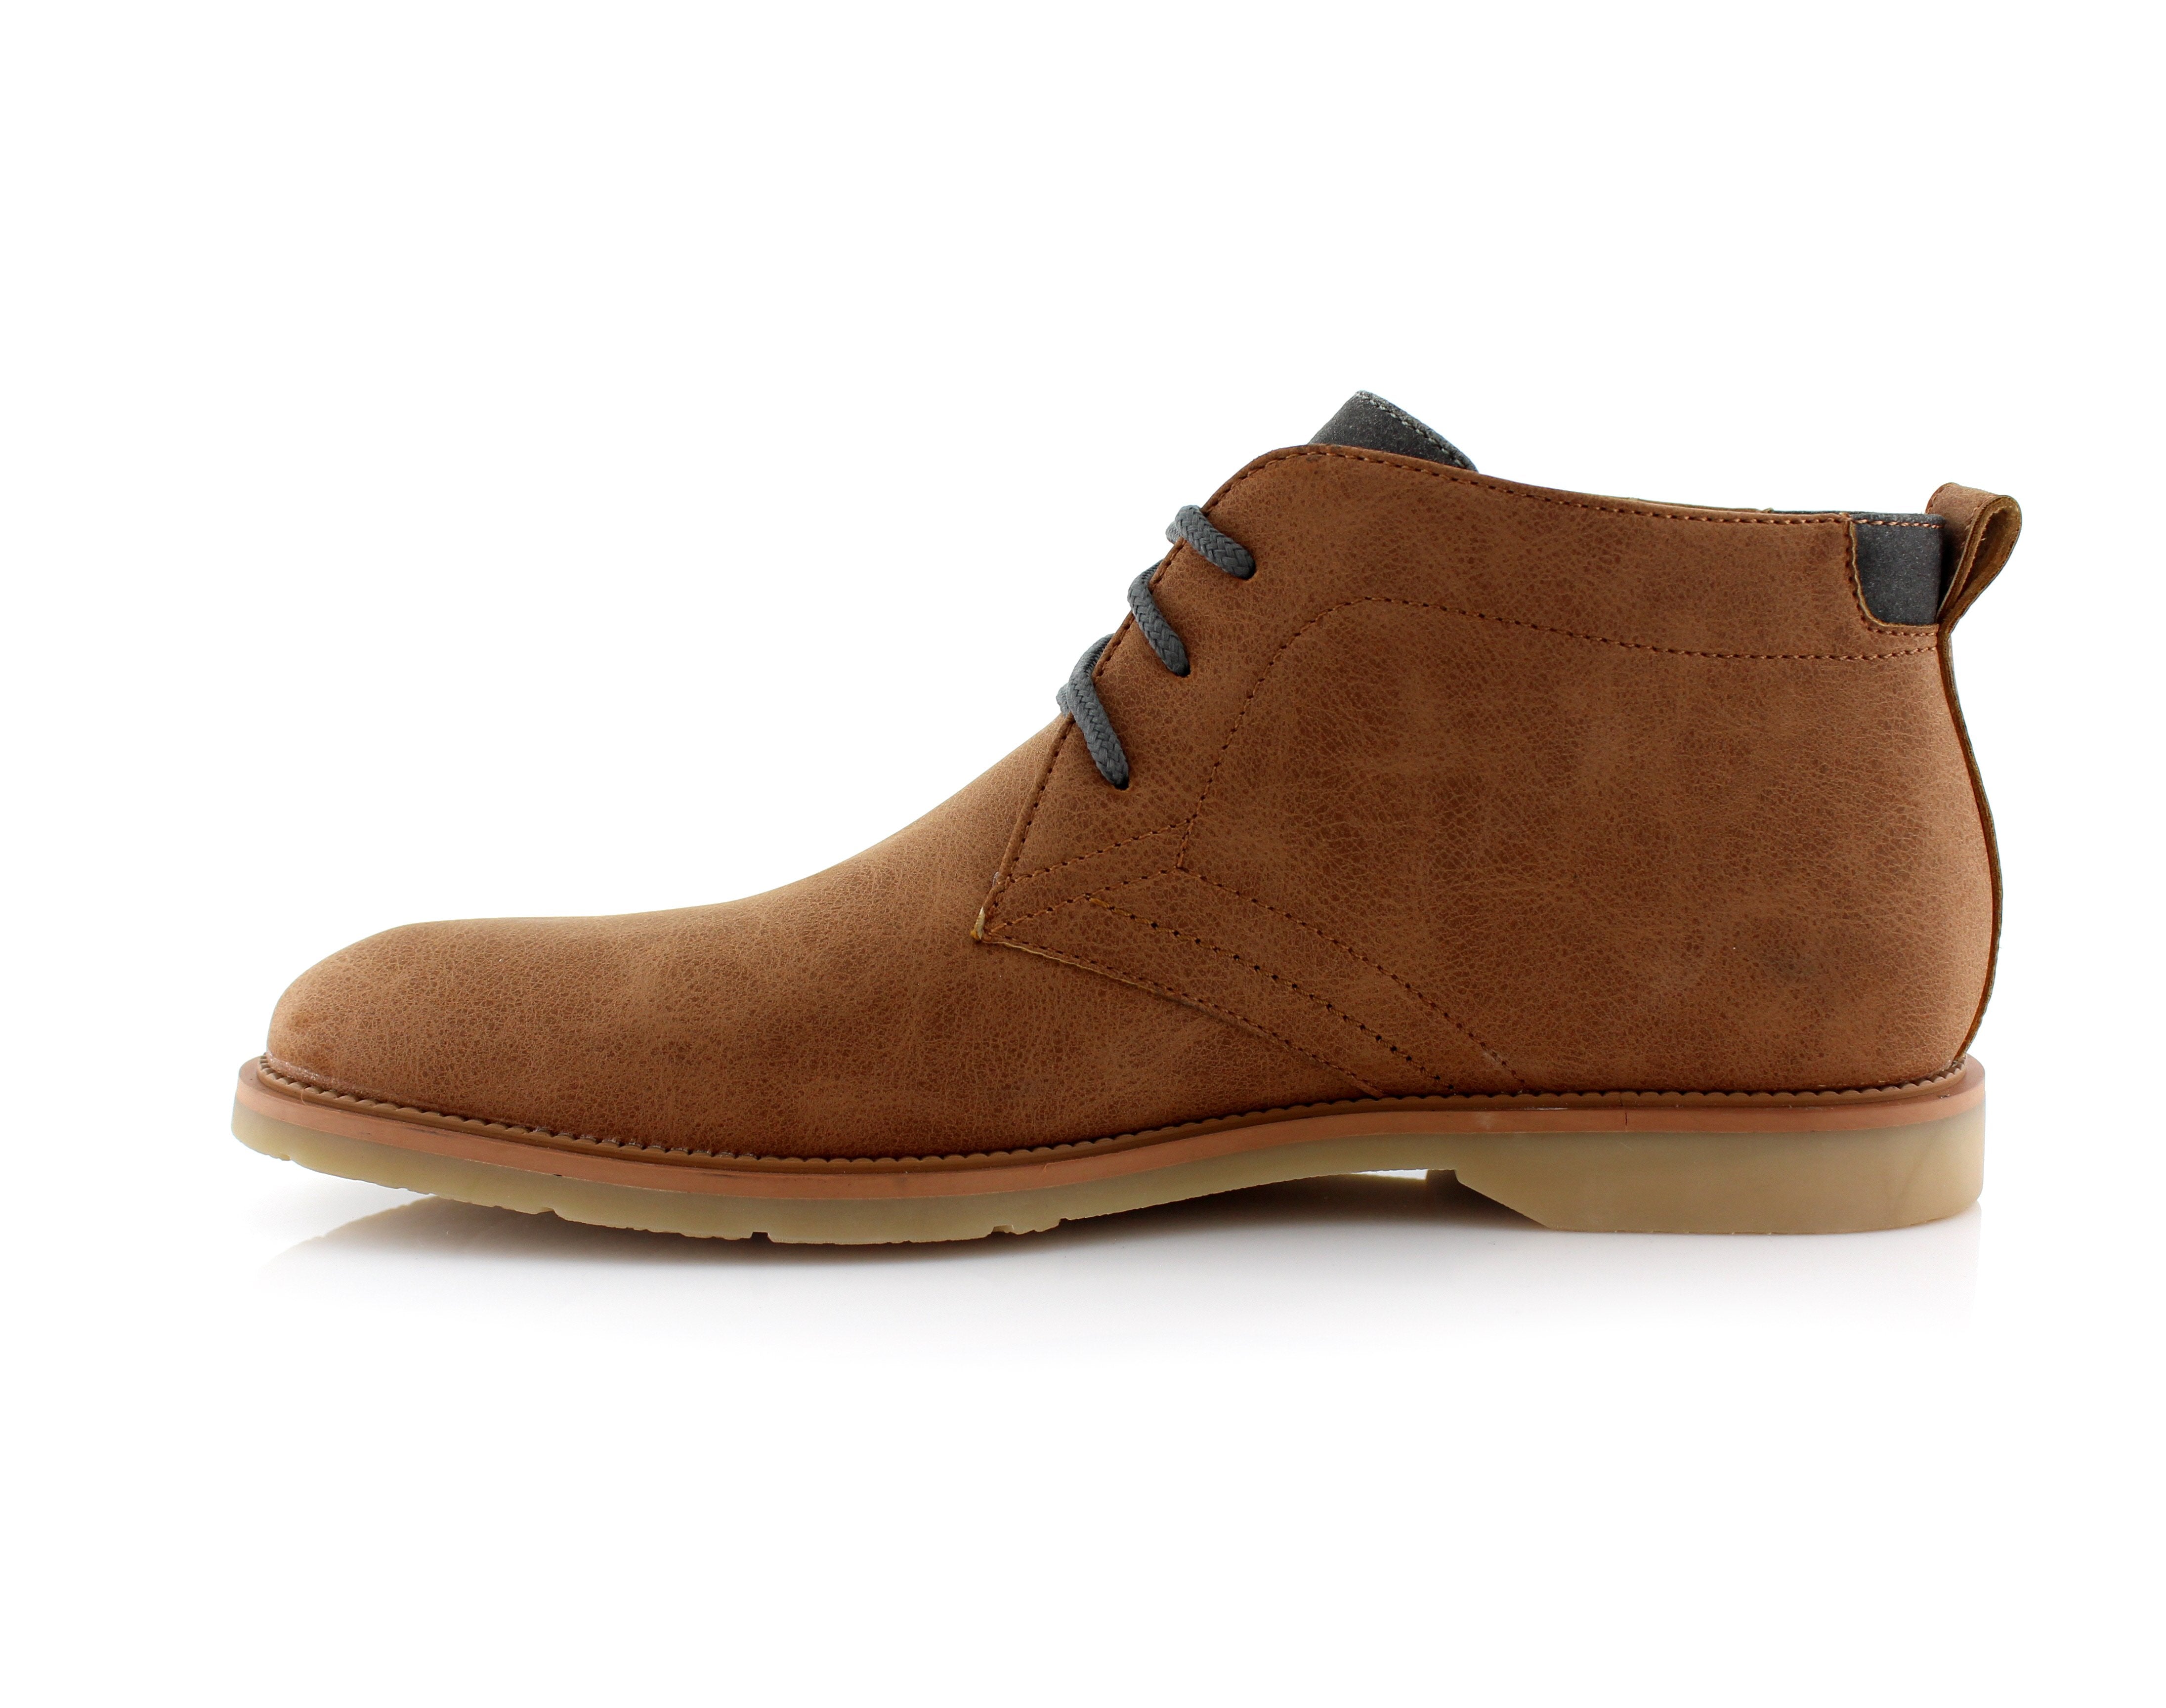 Two-Toned Chukka Boots | Marvin by Ferro Aldo | Conal Footwear | Inner Side Angle View